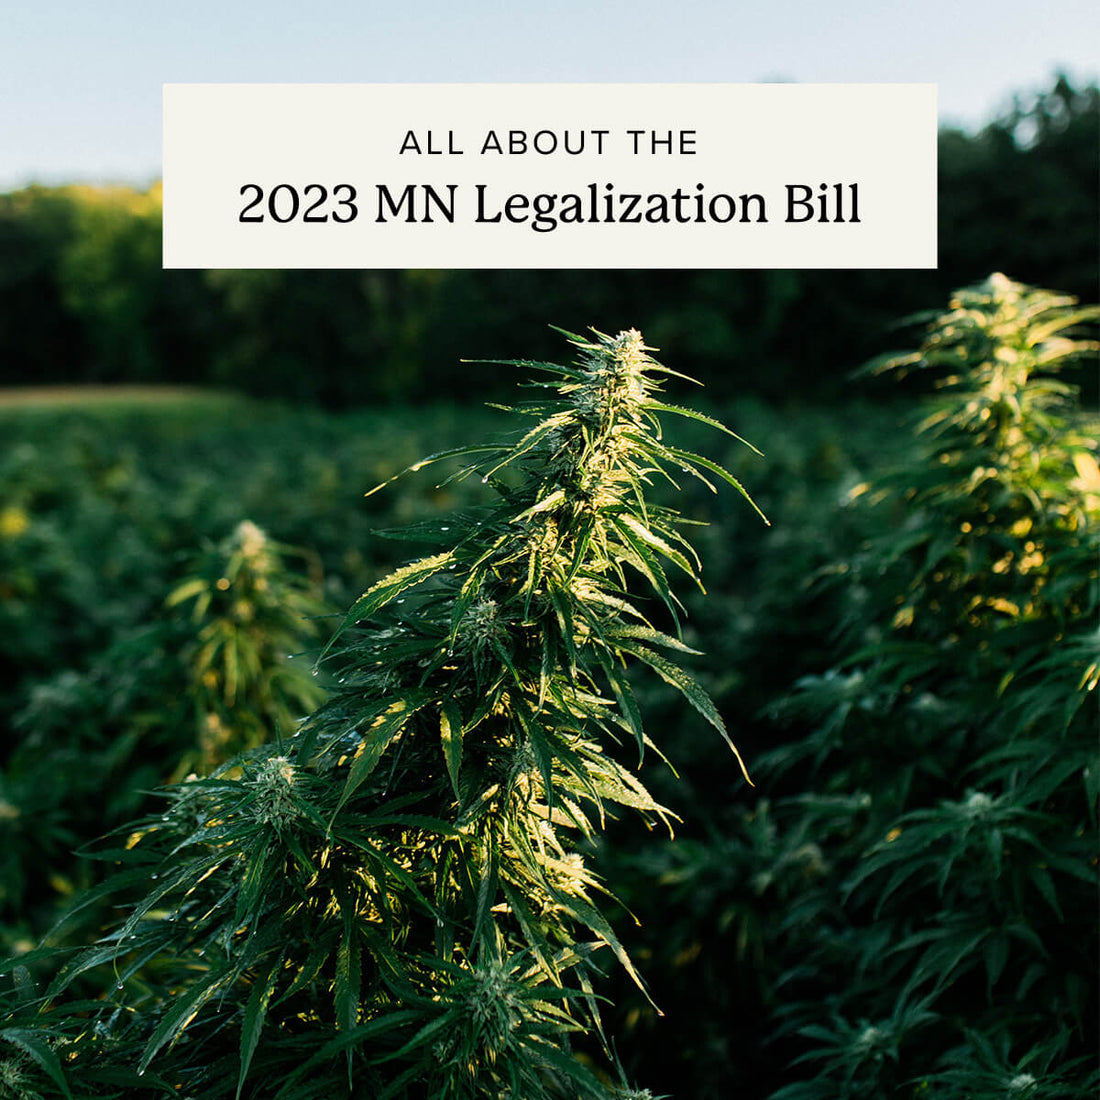 Yes We Cannabis: A Guide to the 2023 MN Legalization Bill